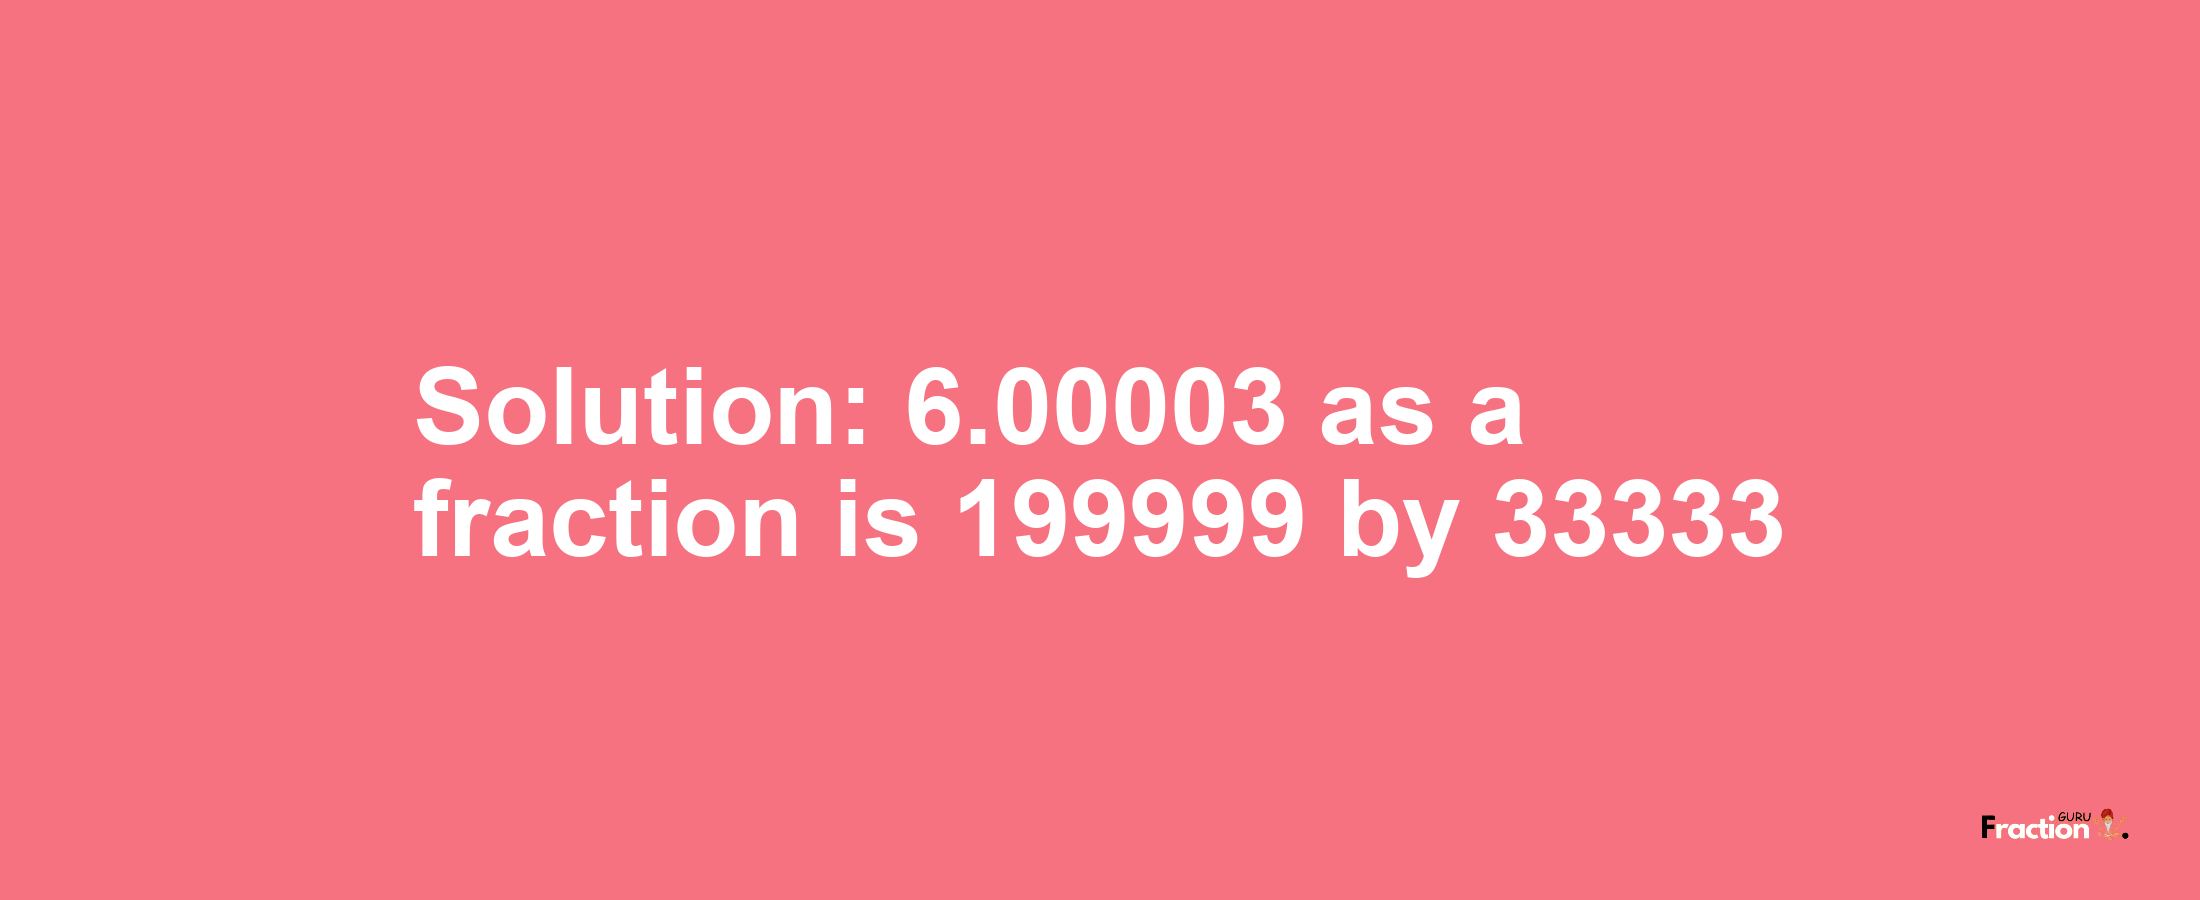 Solution:6.00003 as a fraction is 199999/33333